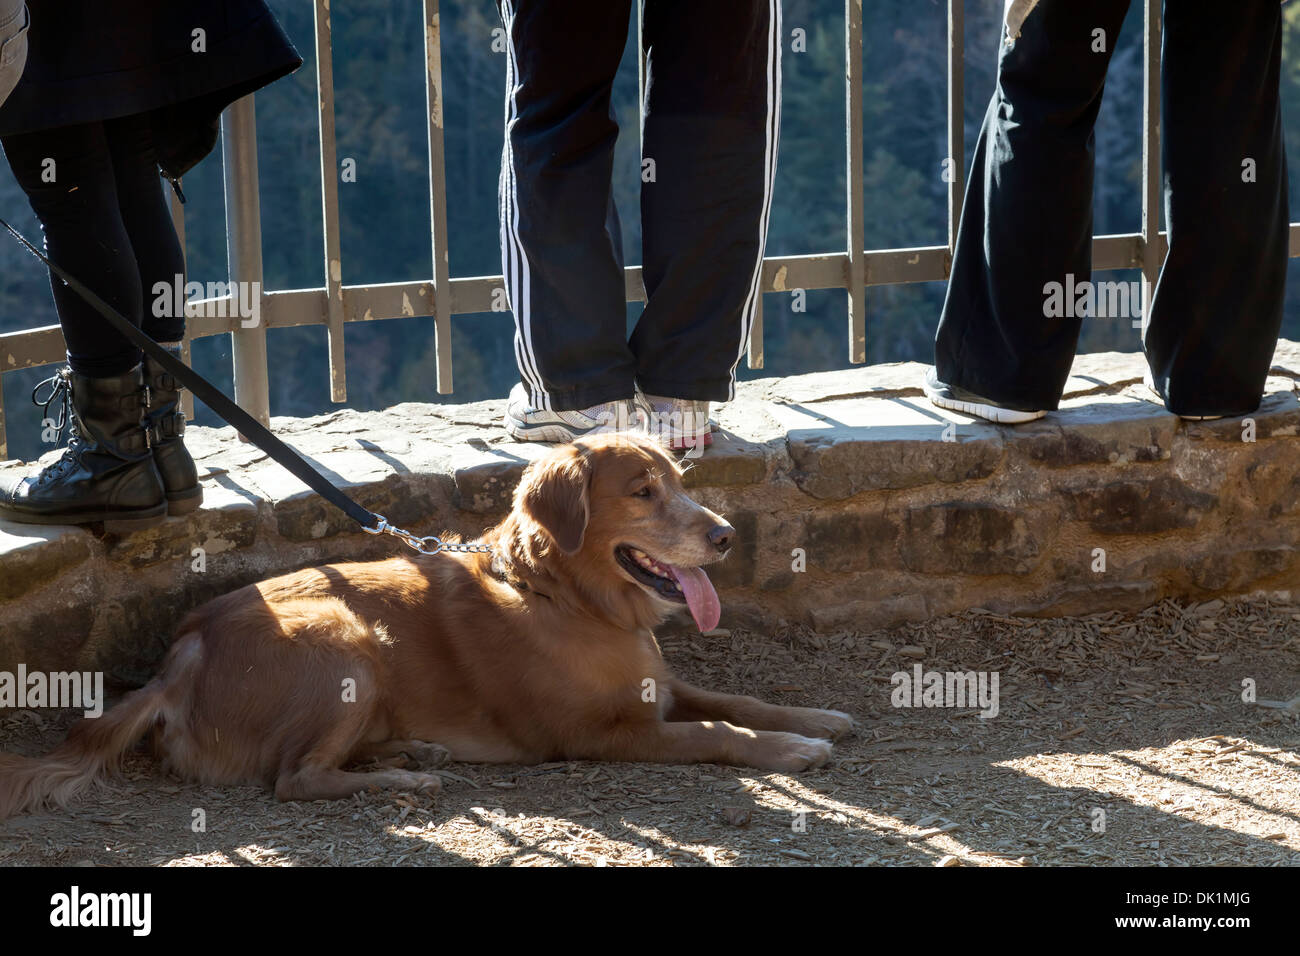 A dog lays at feet of tourists along the railing of a scenic overlook in Tallulah Falls State Park in Rabun County, Georgia. USA Stock Photo